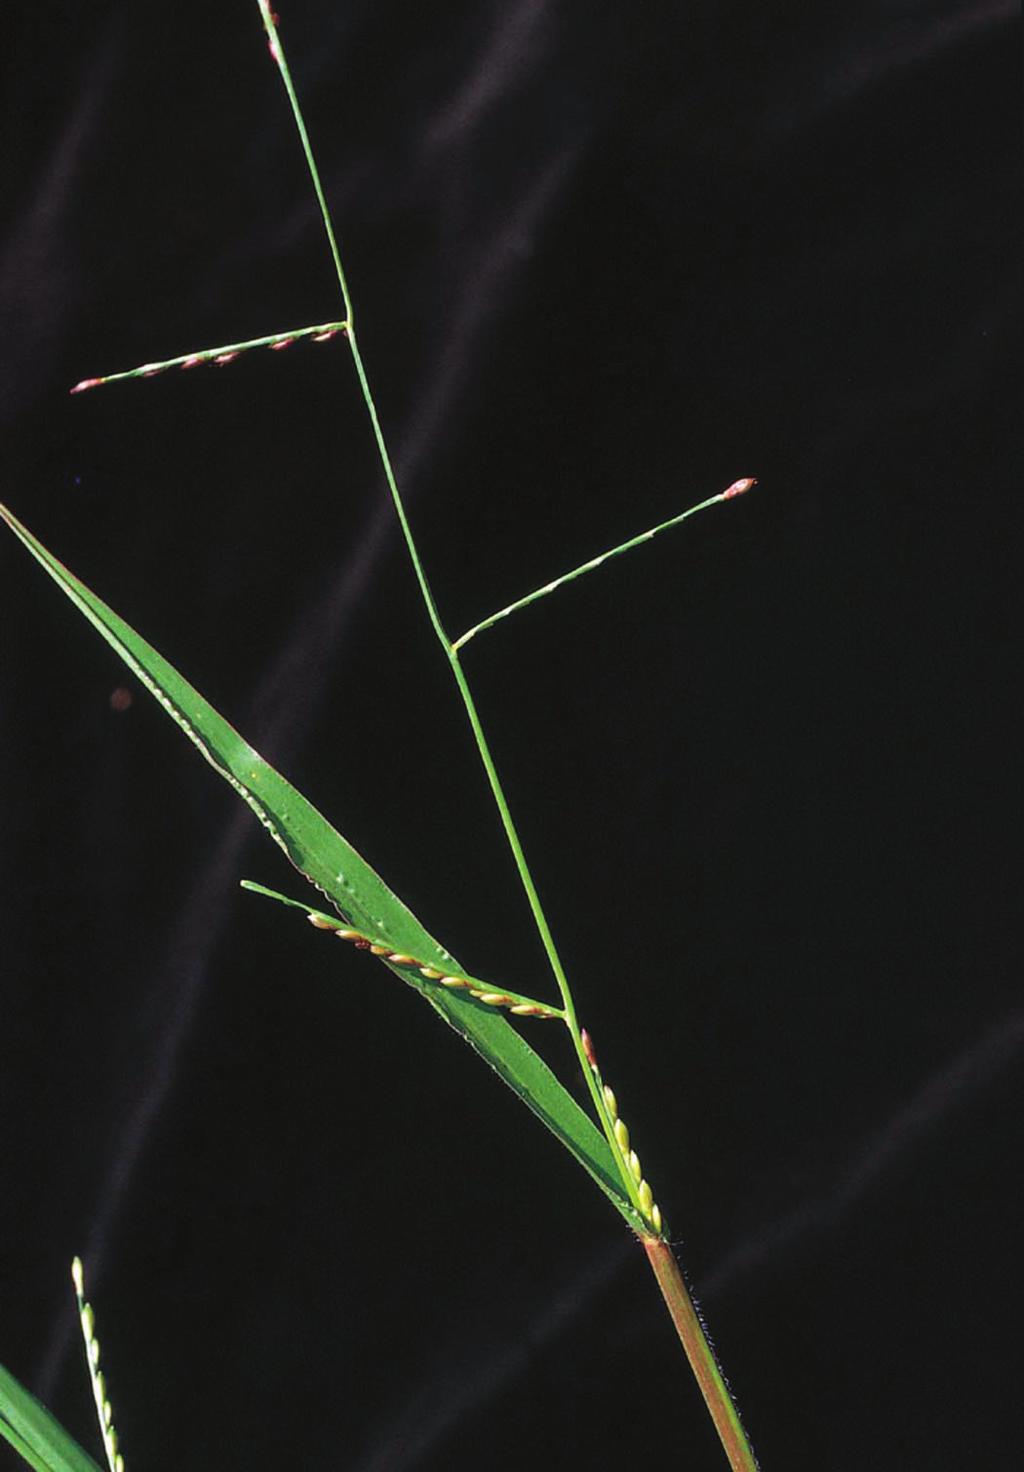 Growth habit: spreading, multi-branched, rooting at lower nodes Joints: hairy Sheath: hairs on margin and sometimes on sheath Ligule: tiny membrane with very short hairs Blade: to 6 inches long and